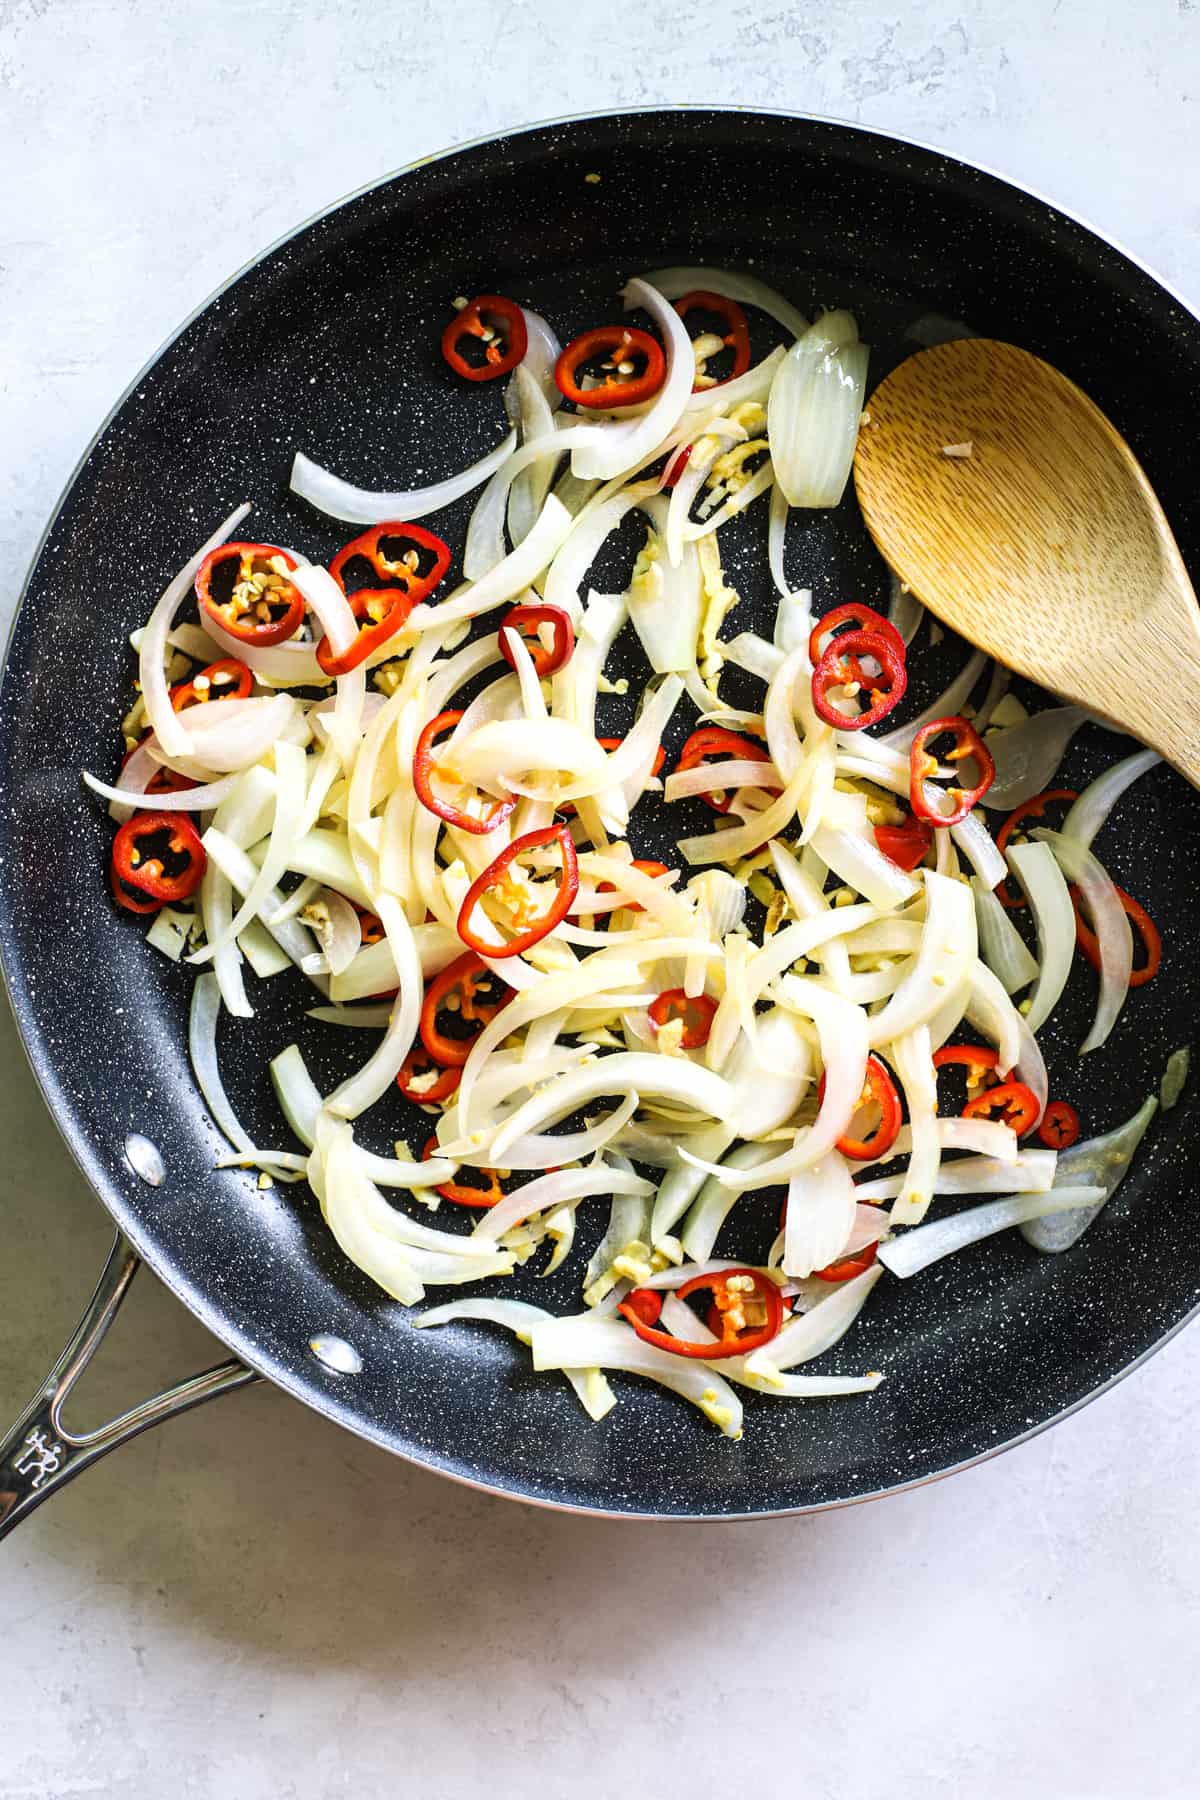 Sliced onions, chili peppers, garlic, and ginger being sautéed in coconut oil